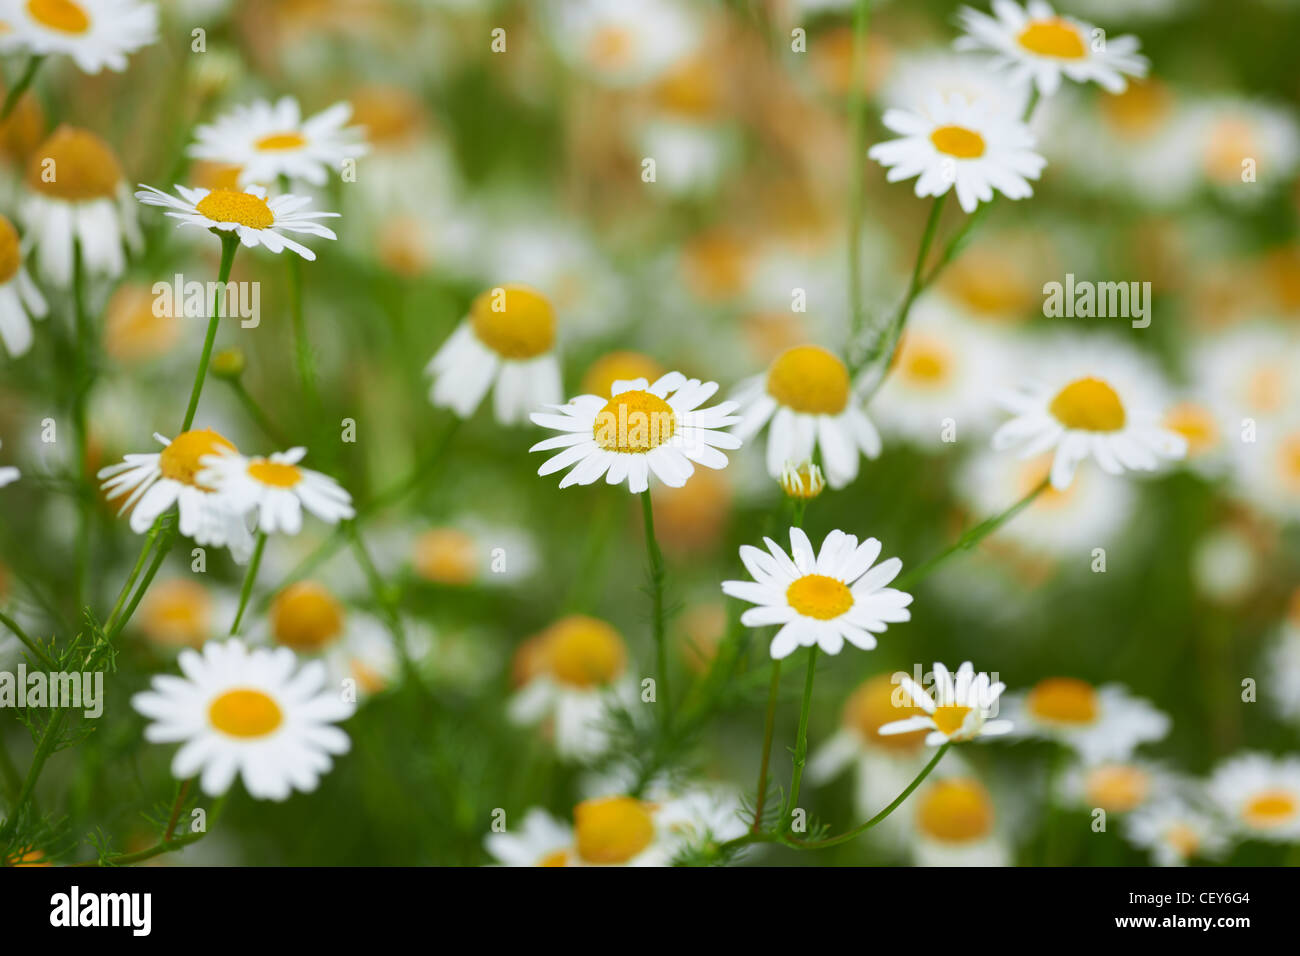 Summer flowers chamomile blossoms with beautiful background blur Stock Photo